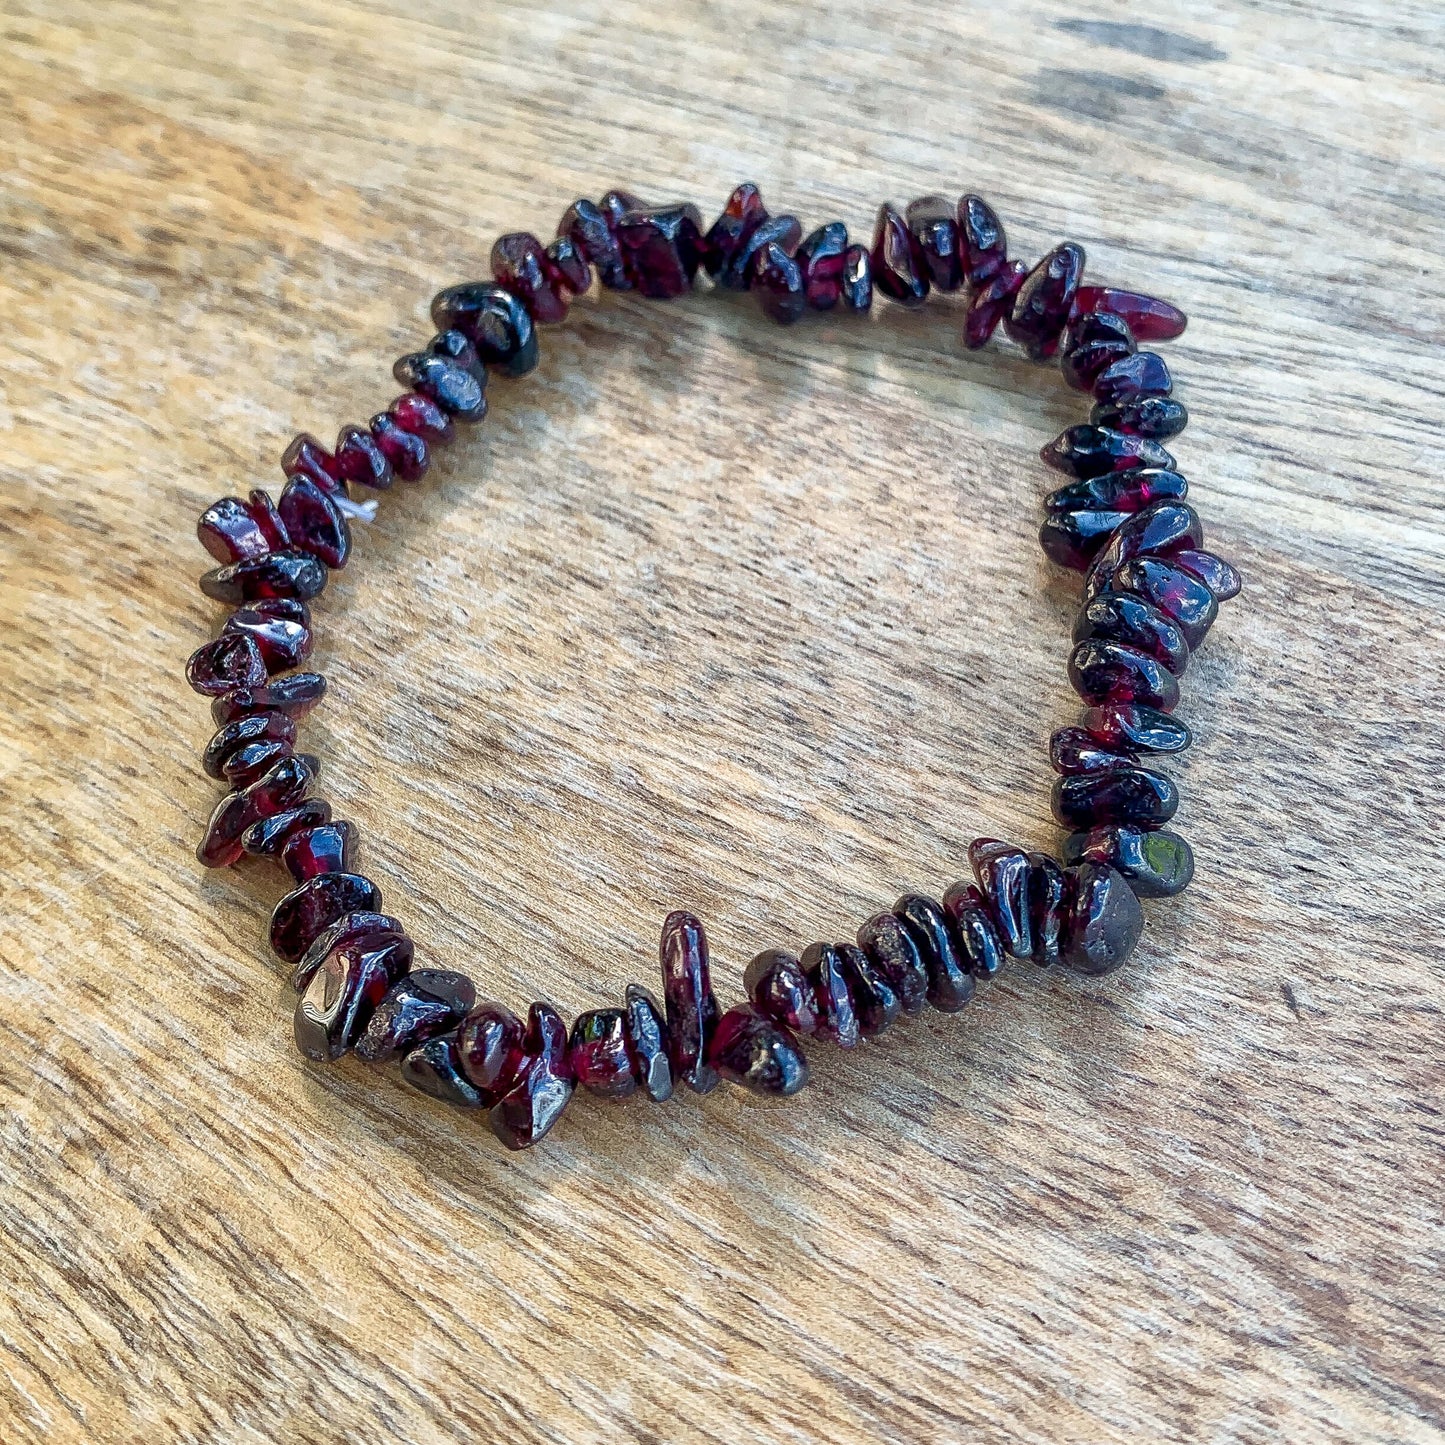 Garnet-Raw-Bracelet. Check out our Gemstone Raw Bracelet Stone - Crystal Stone Jewelry. This are the very Best and Unique Handmade items from Magic Crystals. Raw Crystal Bracelet, Gemstone bracelet, Minimalist Crystal Jewelry, Trendy Summer Jewelry, Gift for him and her. 